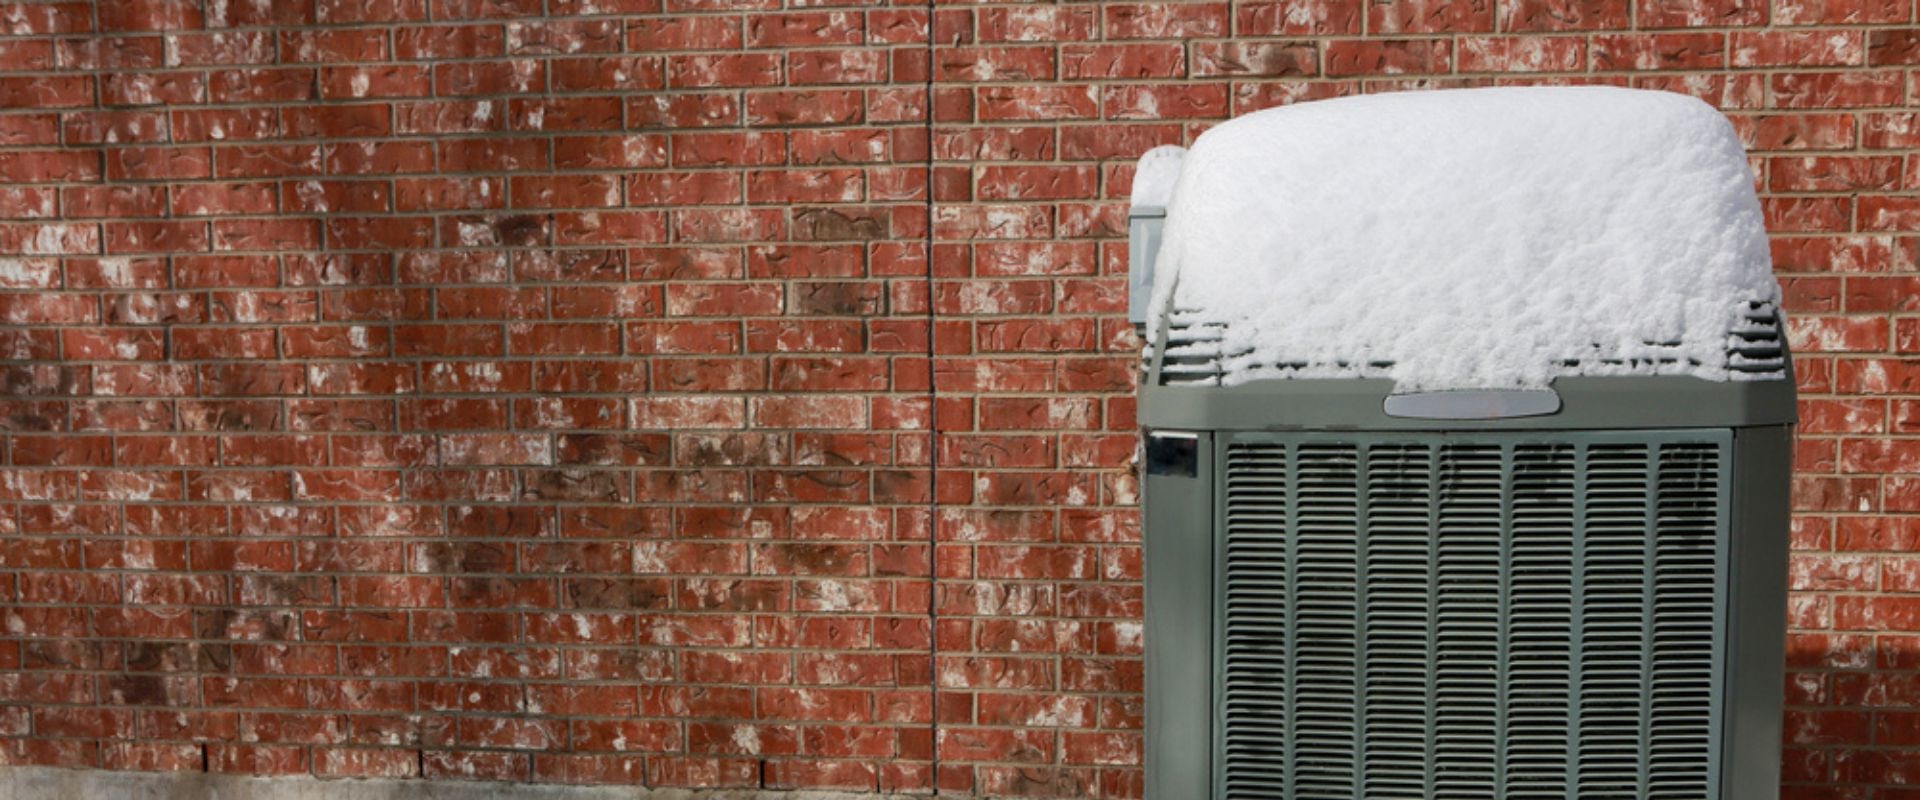 When is the Best Time to Buy an Air Conditioner?